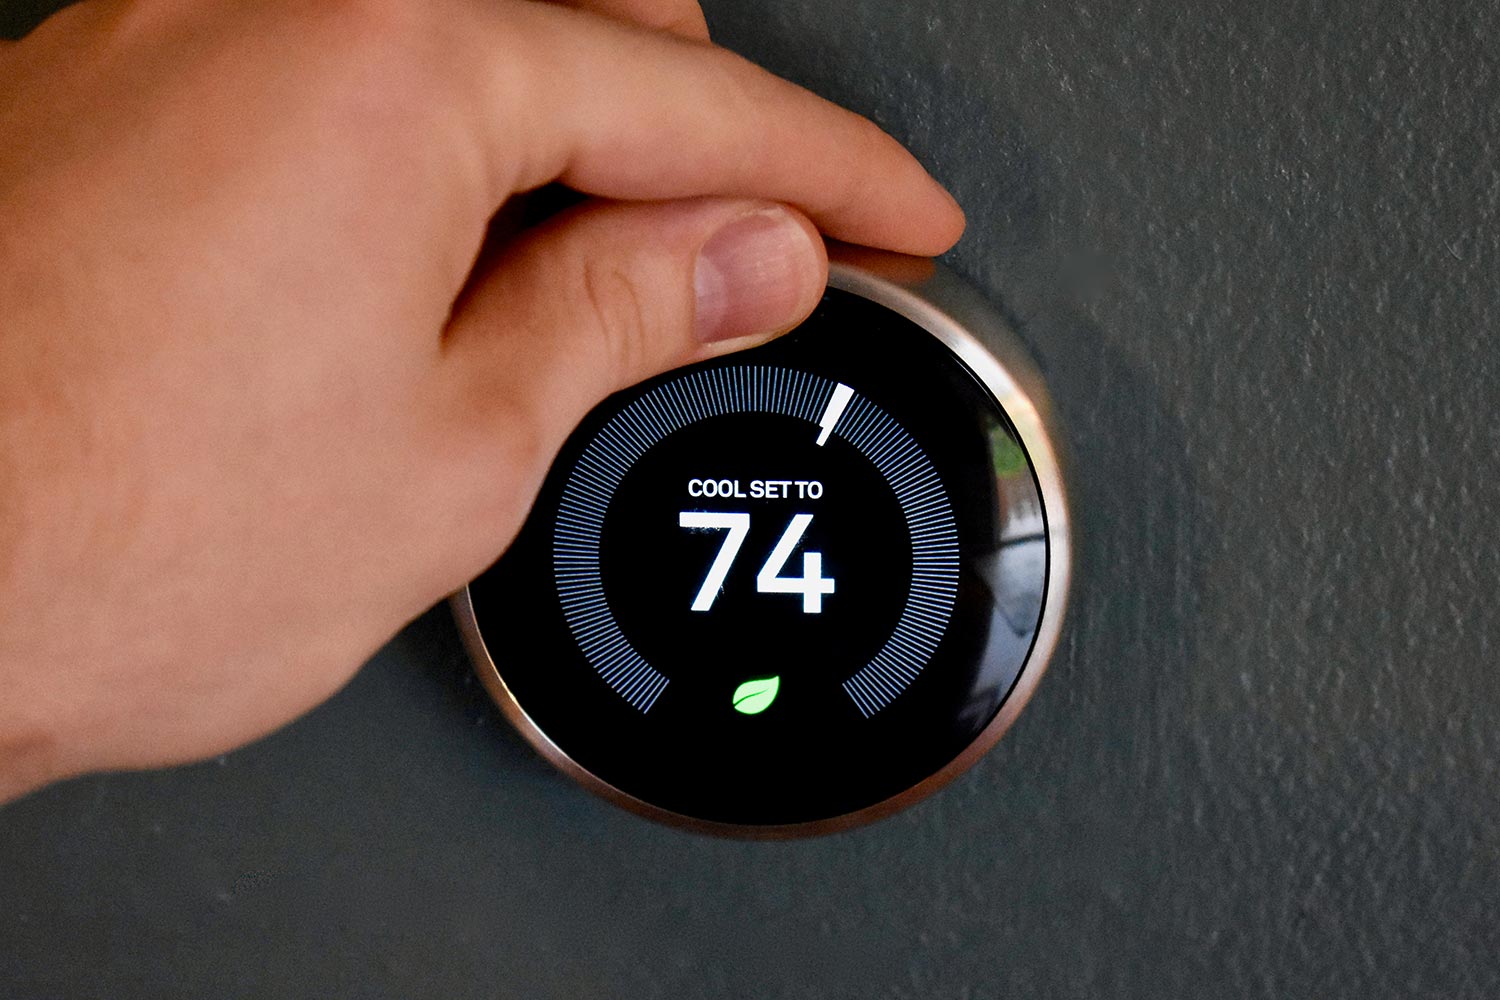 Hand adjusting temperature on smart thermostat to save energy and money